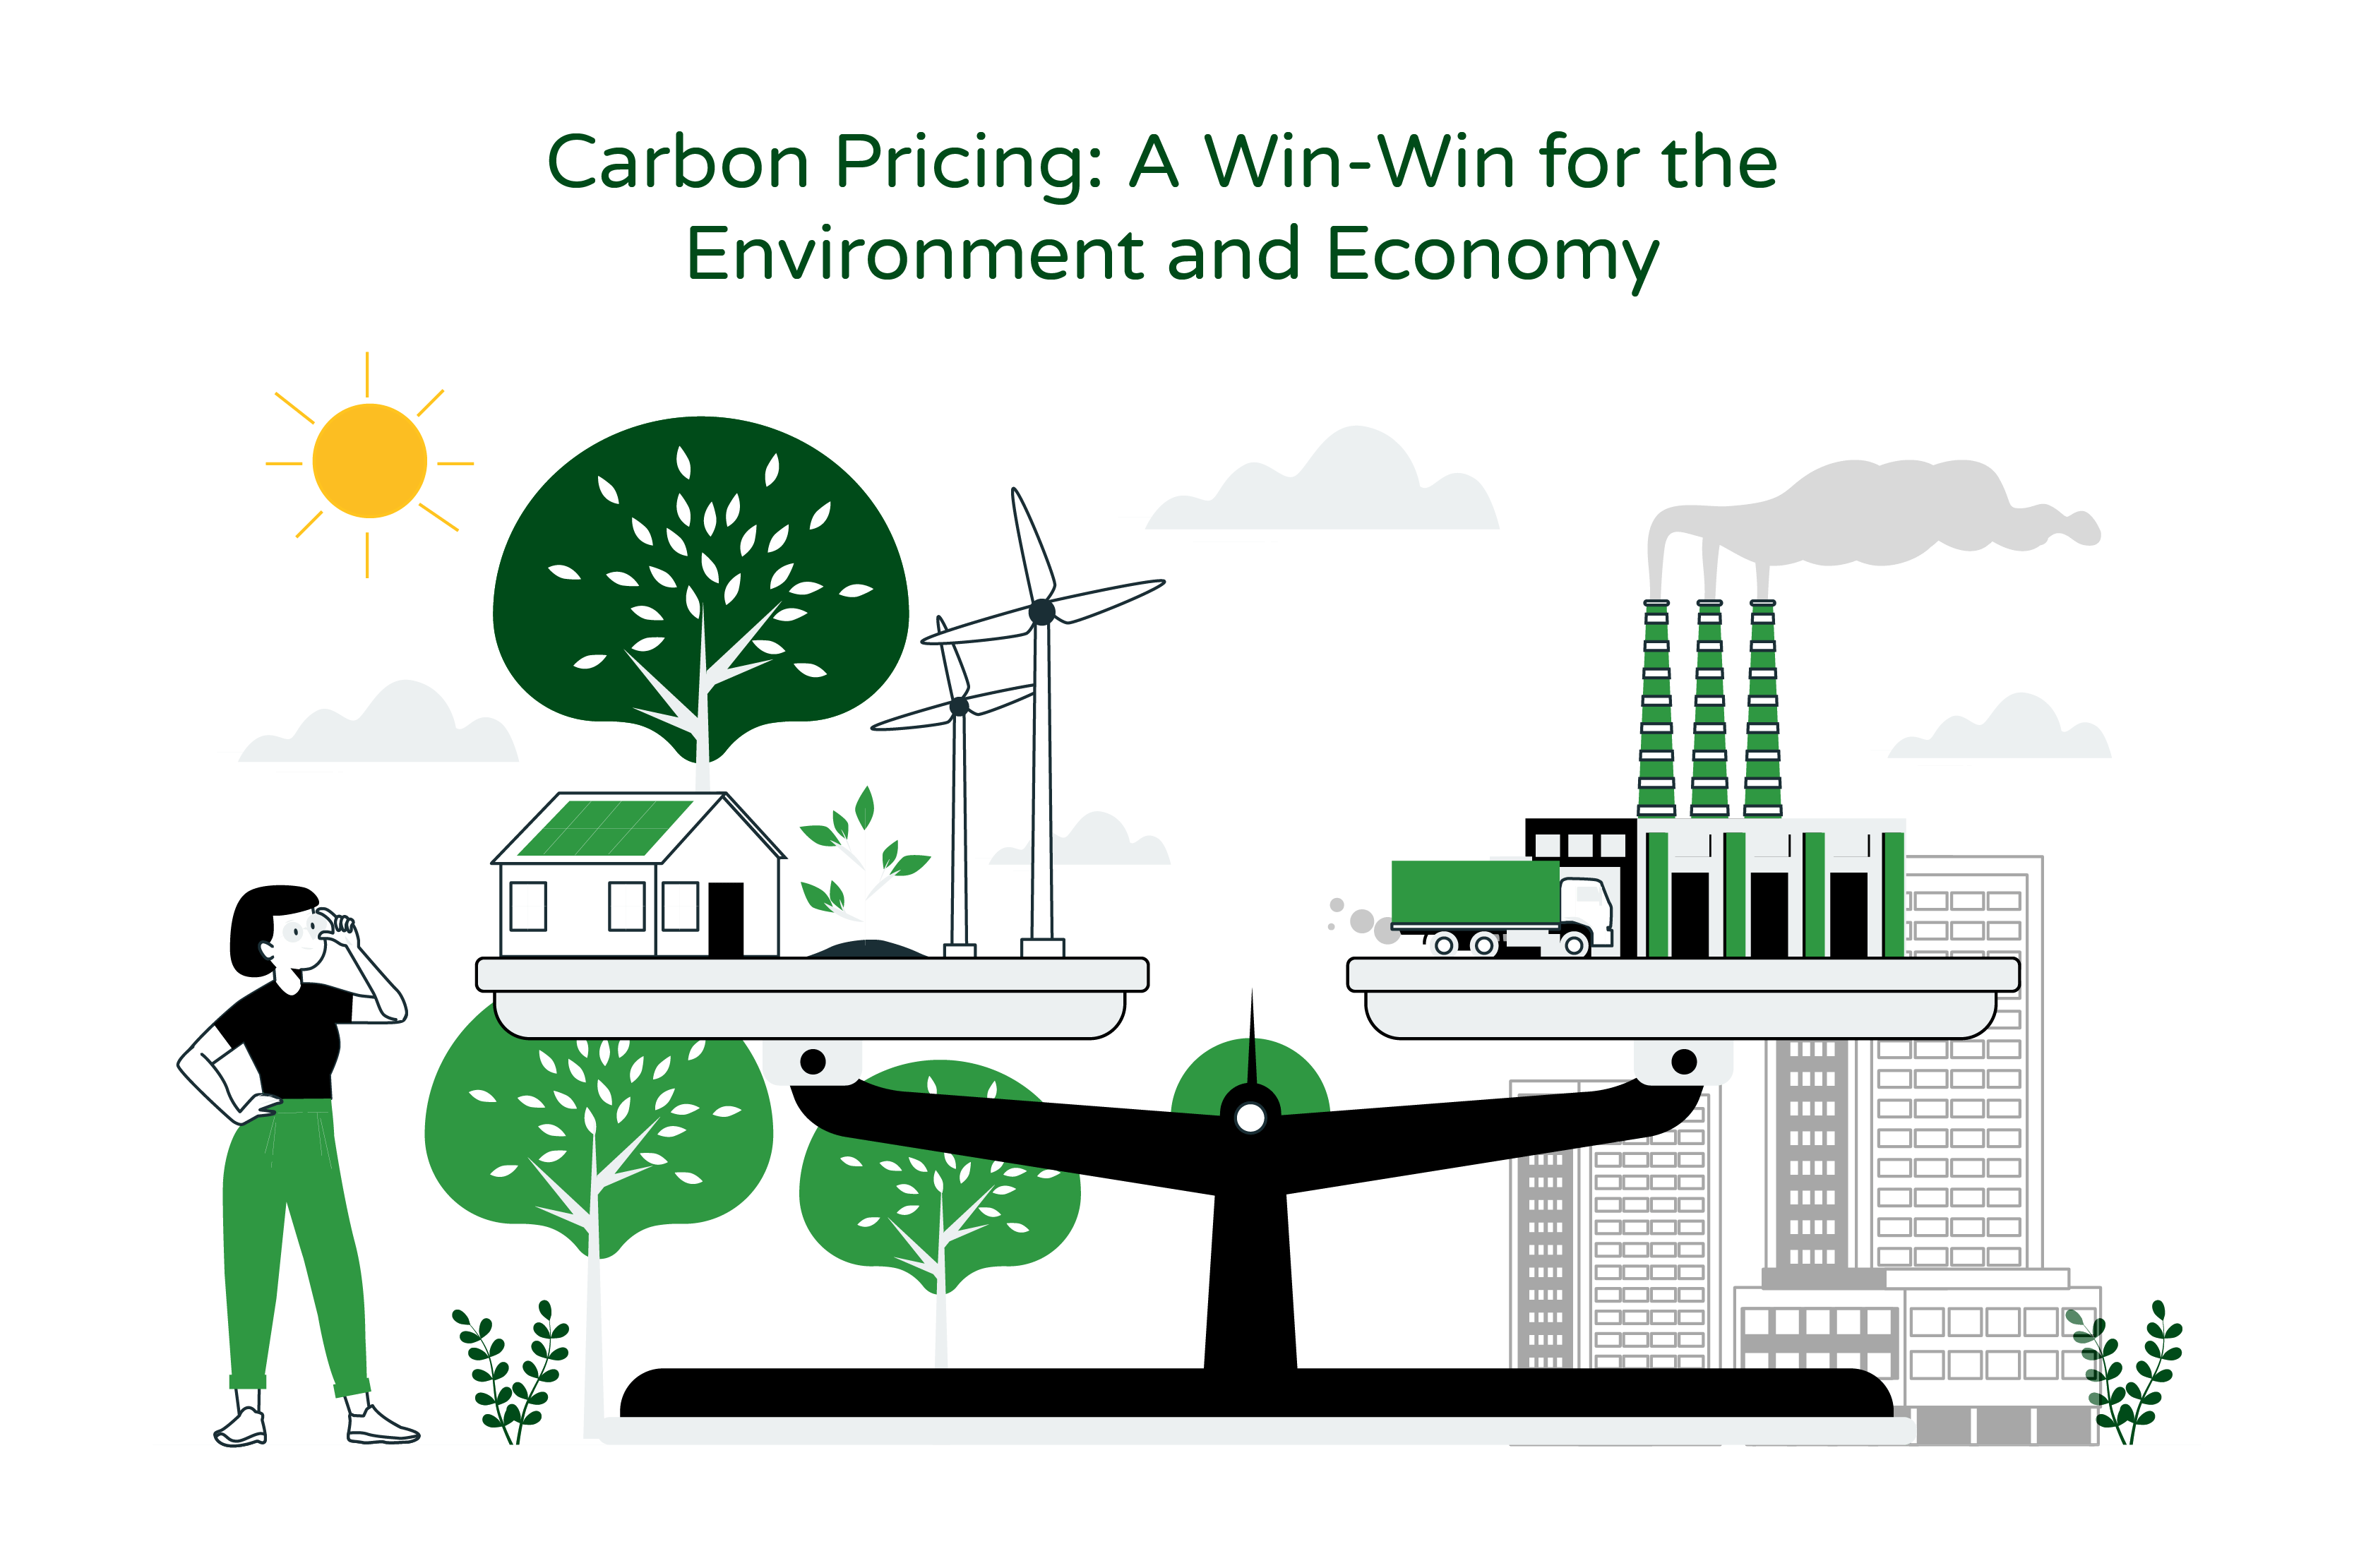 An illustration titled 'Carbon Pricing: A Win-Win for the Environment and Economy.' The illustration portrays a balanced scale, visually divided into two sides. On the left side, there are depictions of thriving industries and large buildings, symbolizing economic growth and development. This side represents the benefits to the economy that can result from carbon pricing.  On the right side of the scale, there is a depiction of a home surrounded by windmills, indicating the use of renewable energy sources. The presence of a shining sun and a pristine, green environment signifies the positive impact of sustainable practices and a reduced carbon footprint.  Overall, the illustration communicates the idea that implementing carbon pricing can lead to a harmonious balance between economic prosperity and a sustainable environment, benefitting both aspects in a mutually advantageous way.